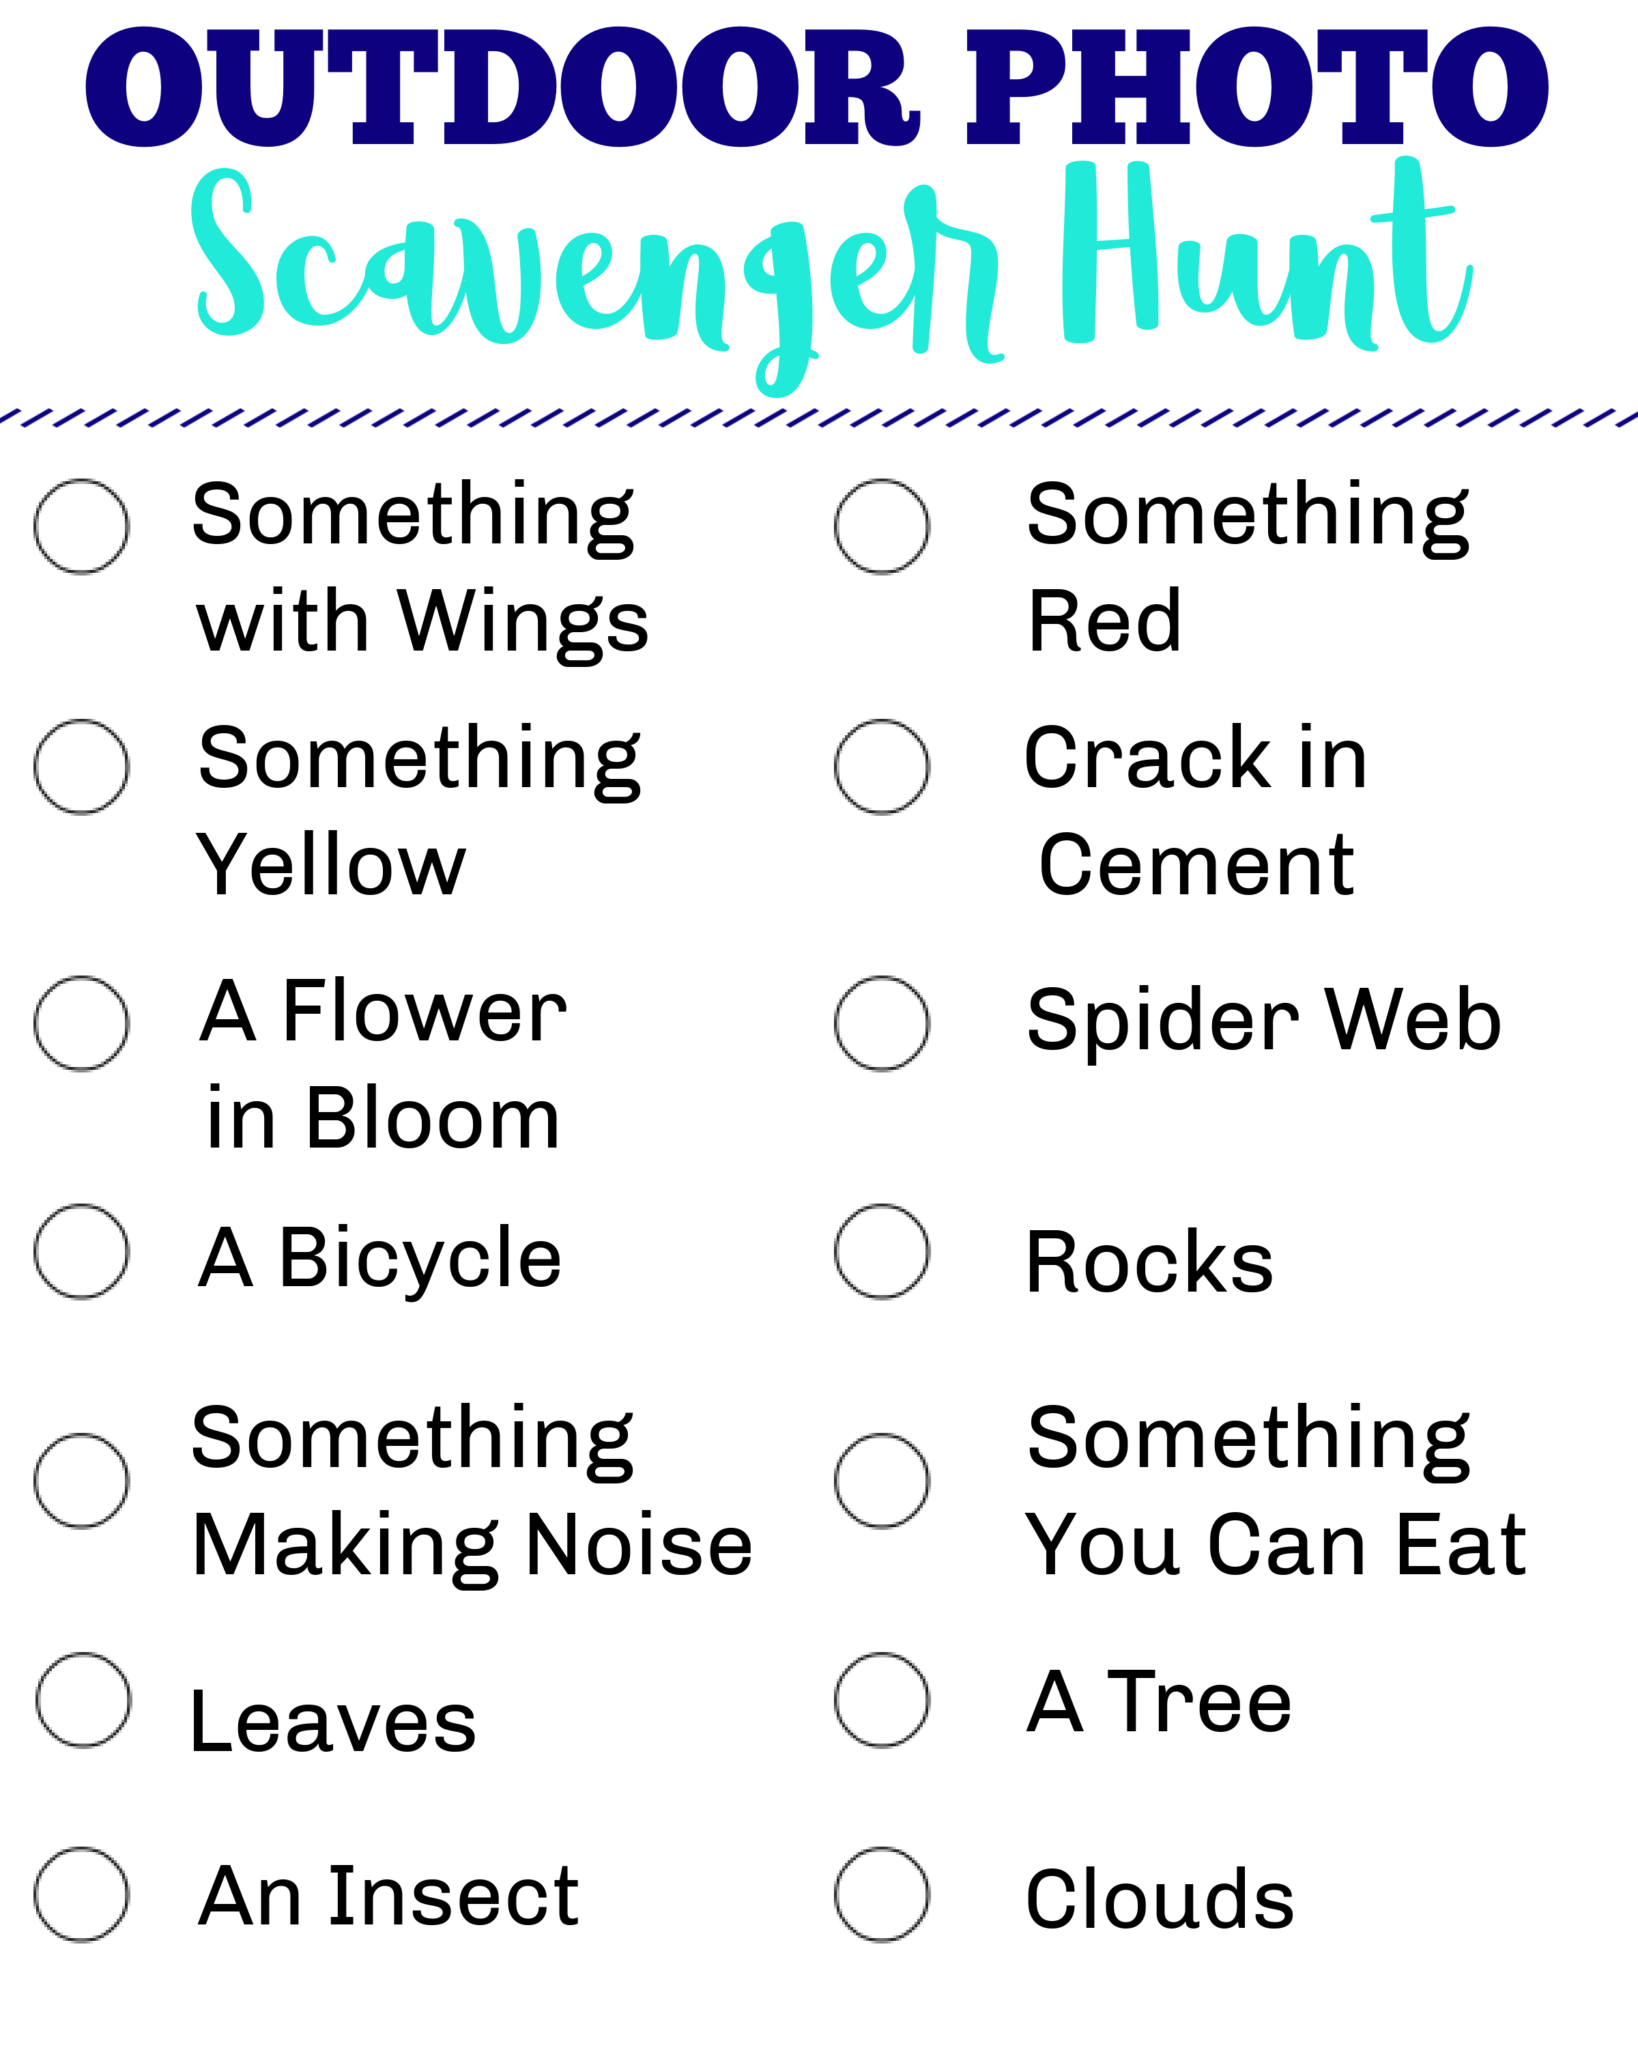 Outdoor Photo Scavenger Hunt for Kids - Printable Clues